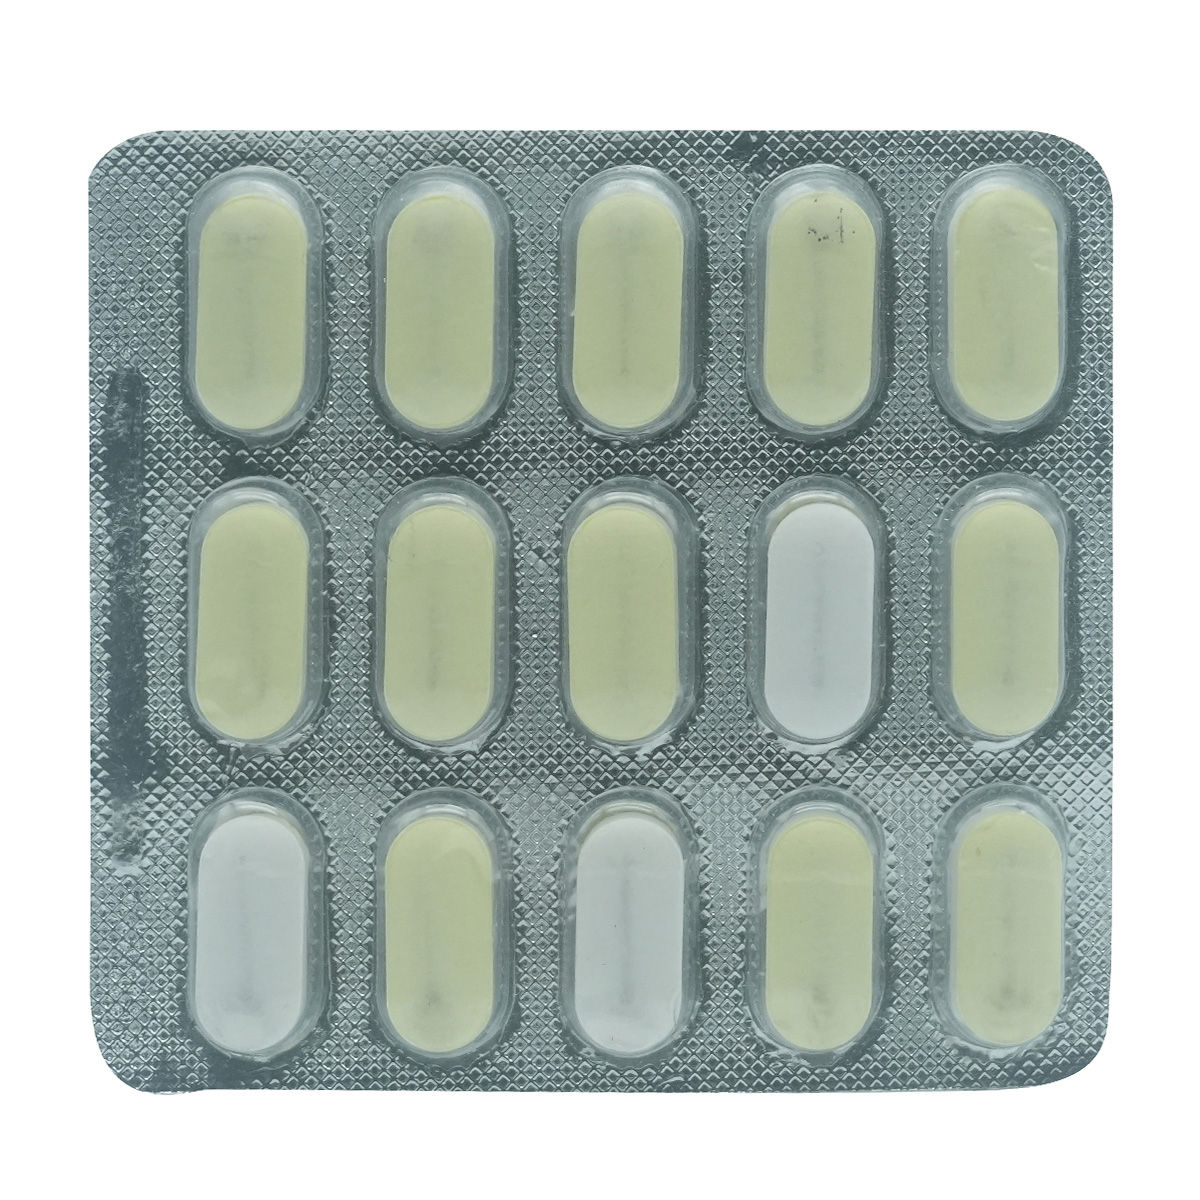 Glimitos-M1 Tablet 15's, Pack of 15 TABLETS